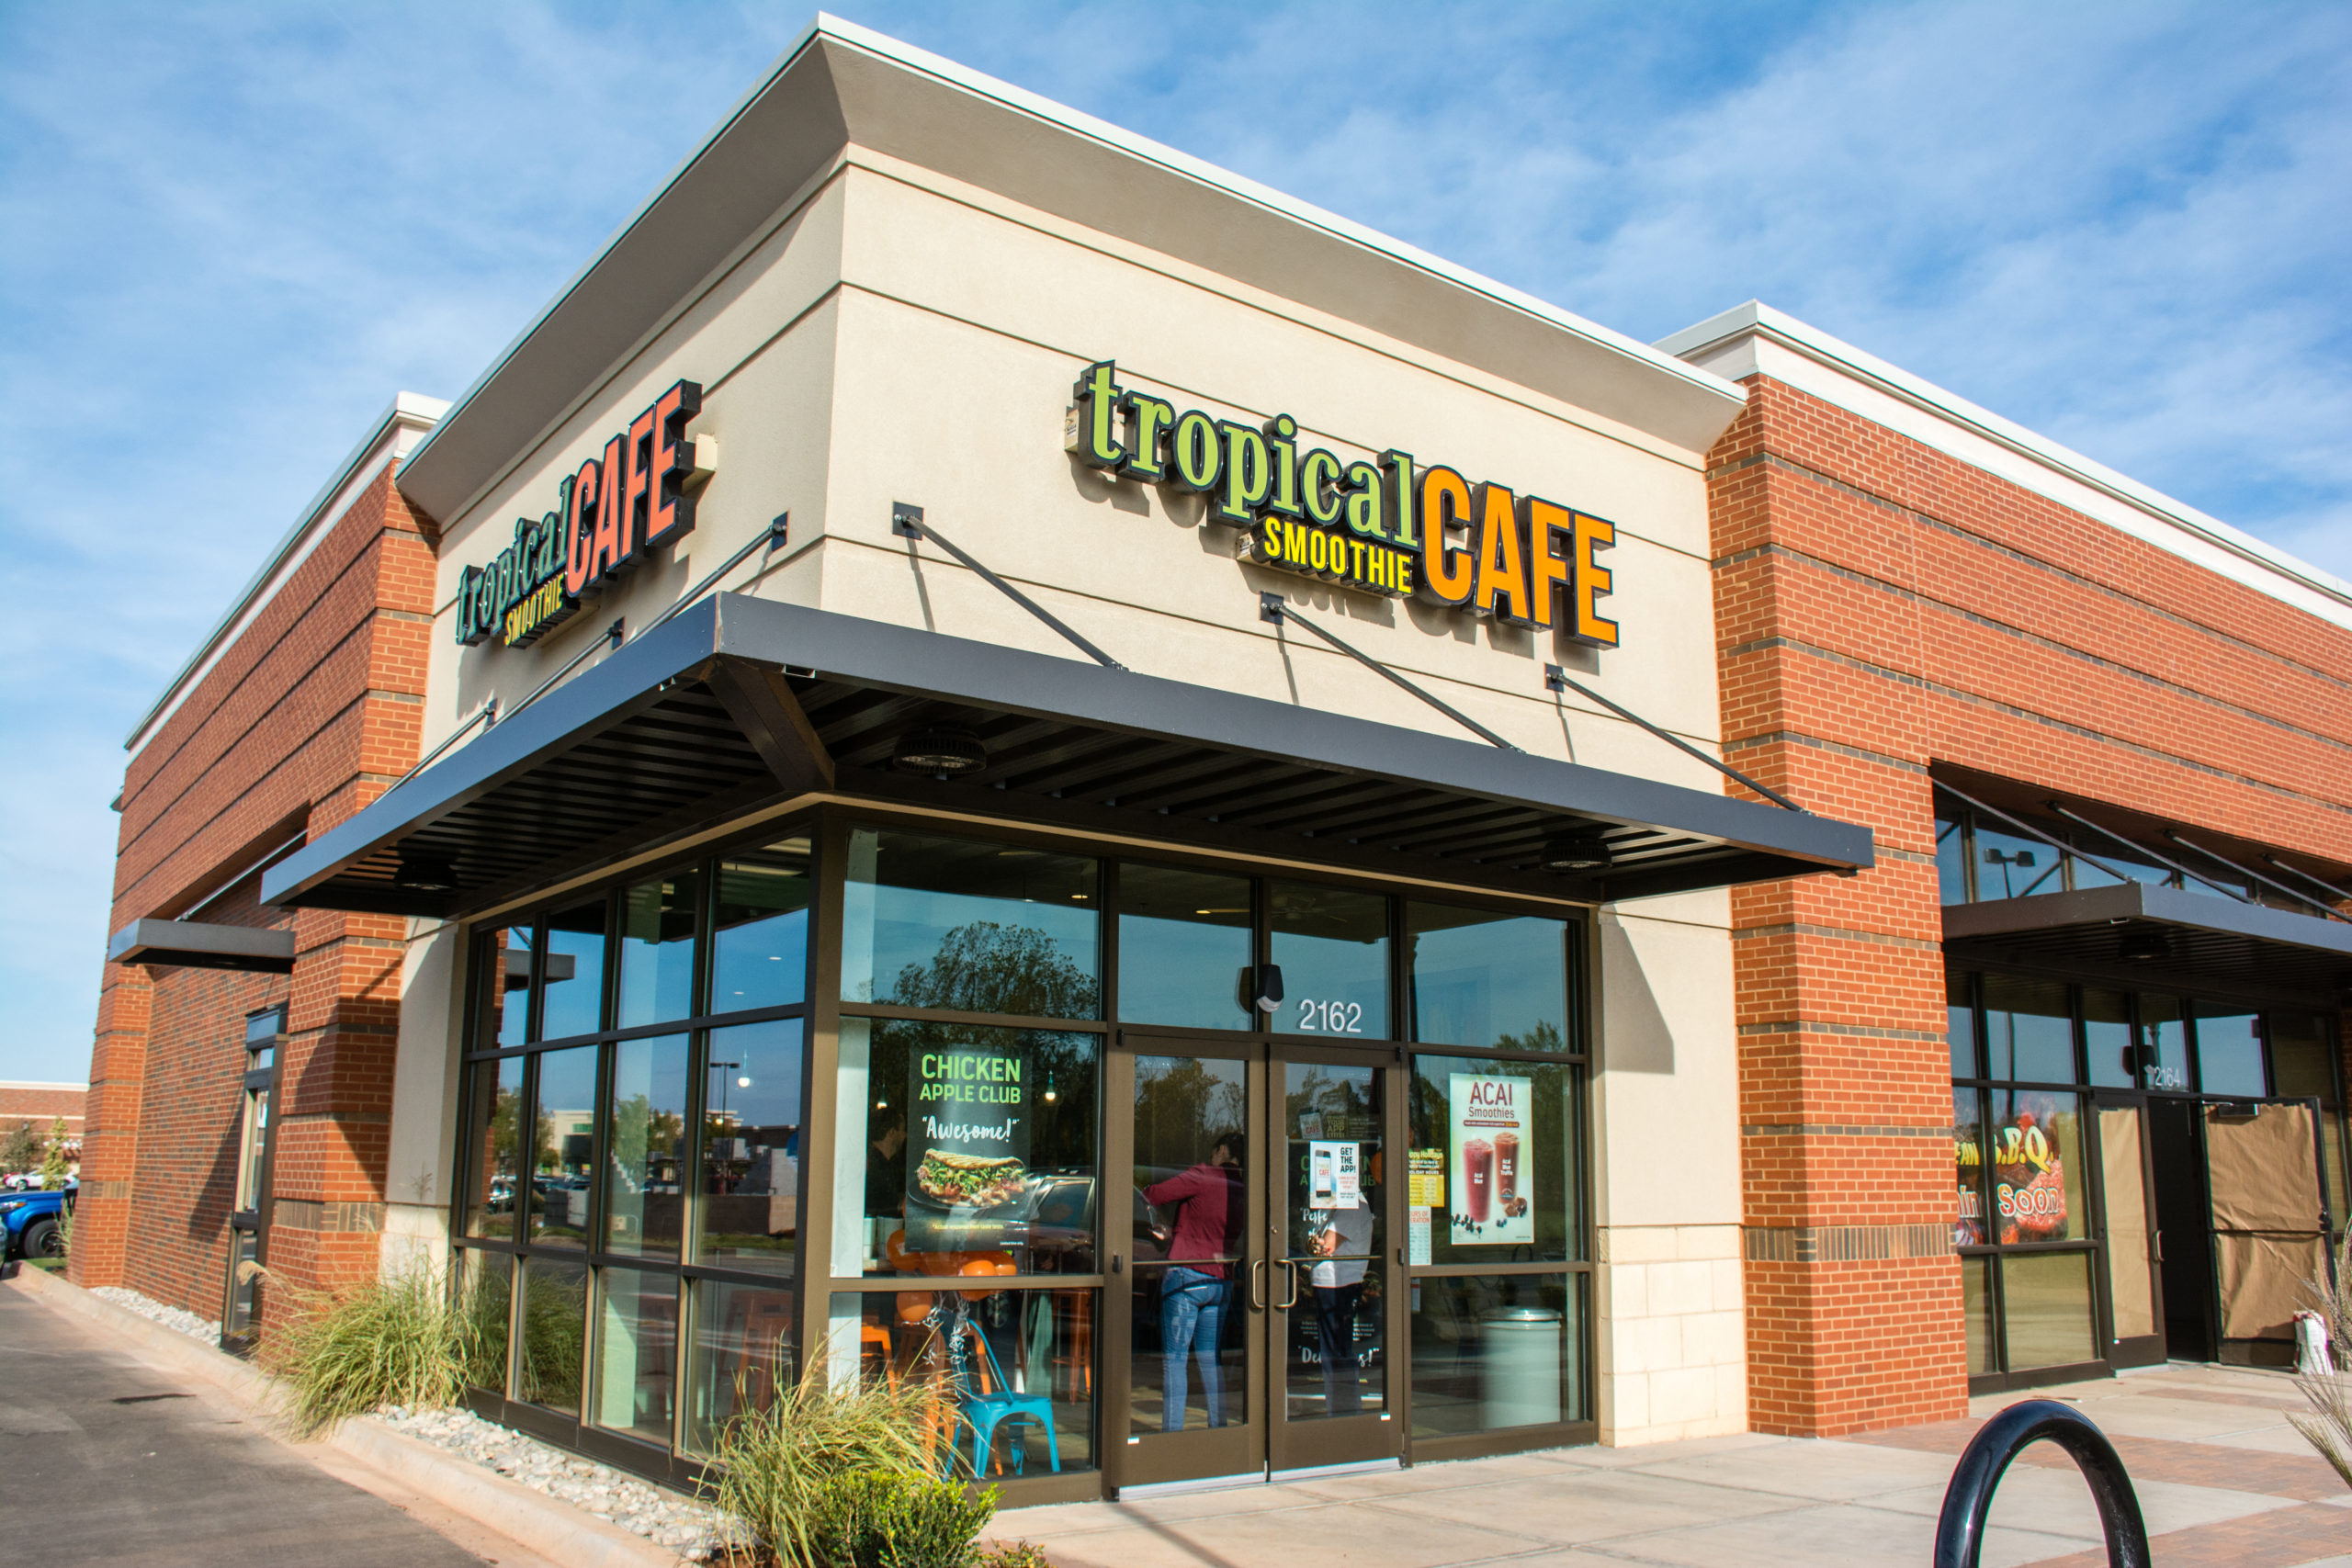 1100th Tropical Smoothie Cafe